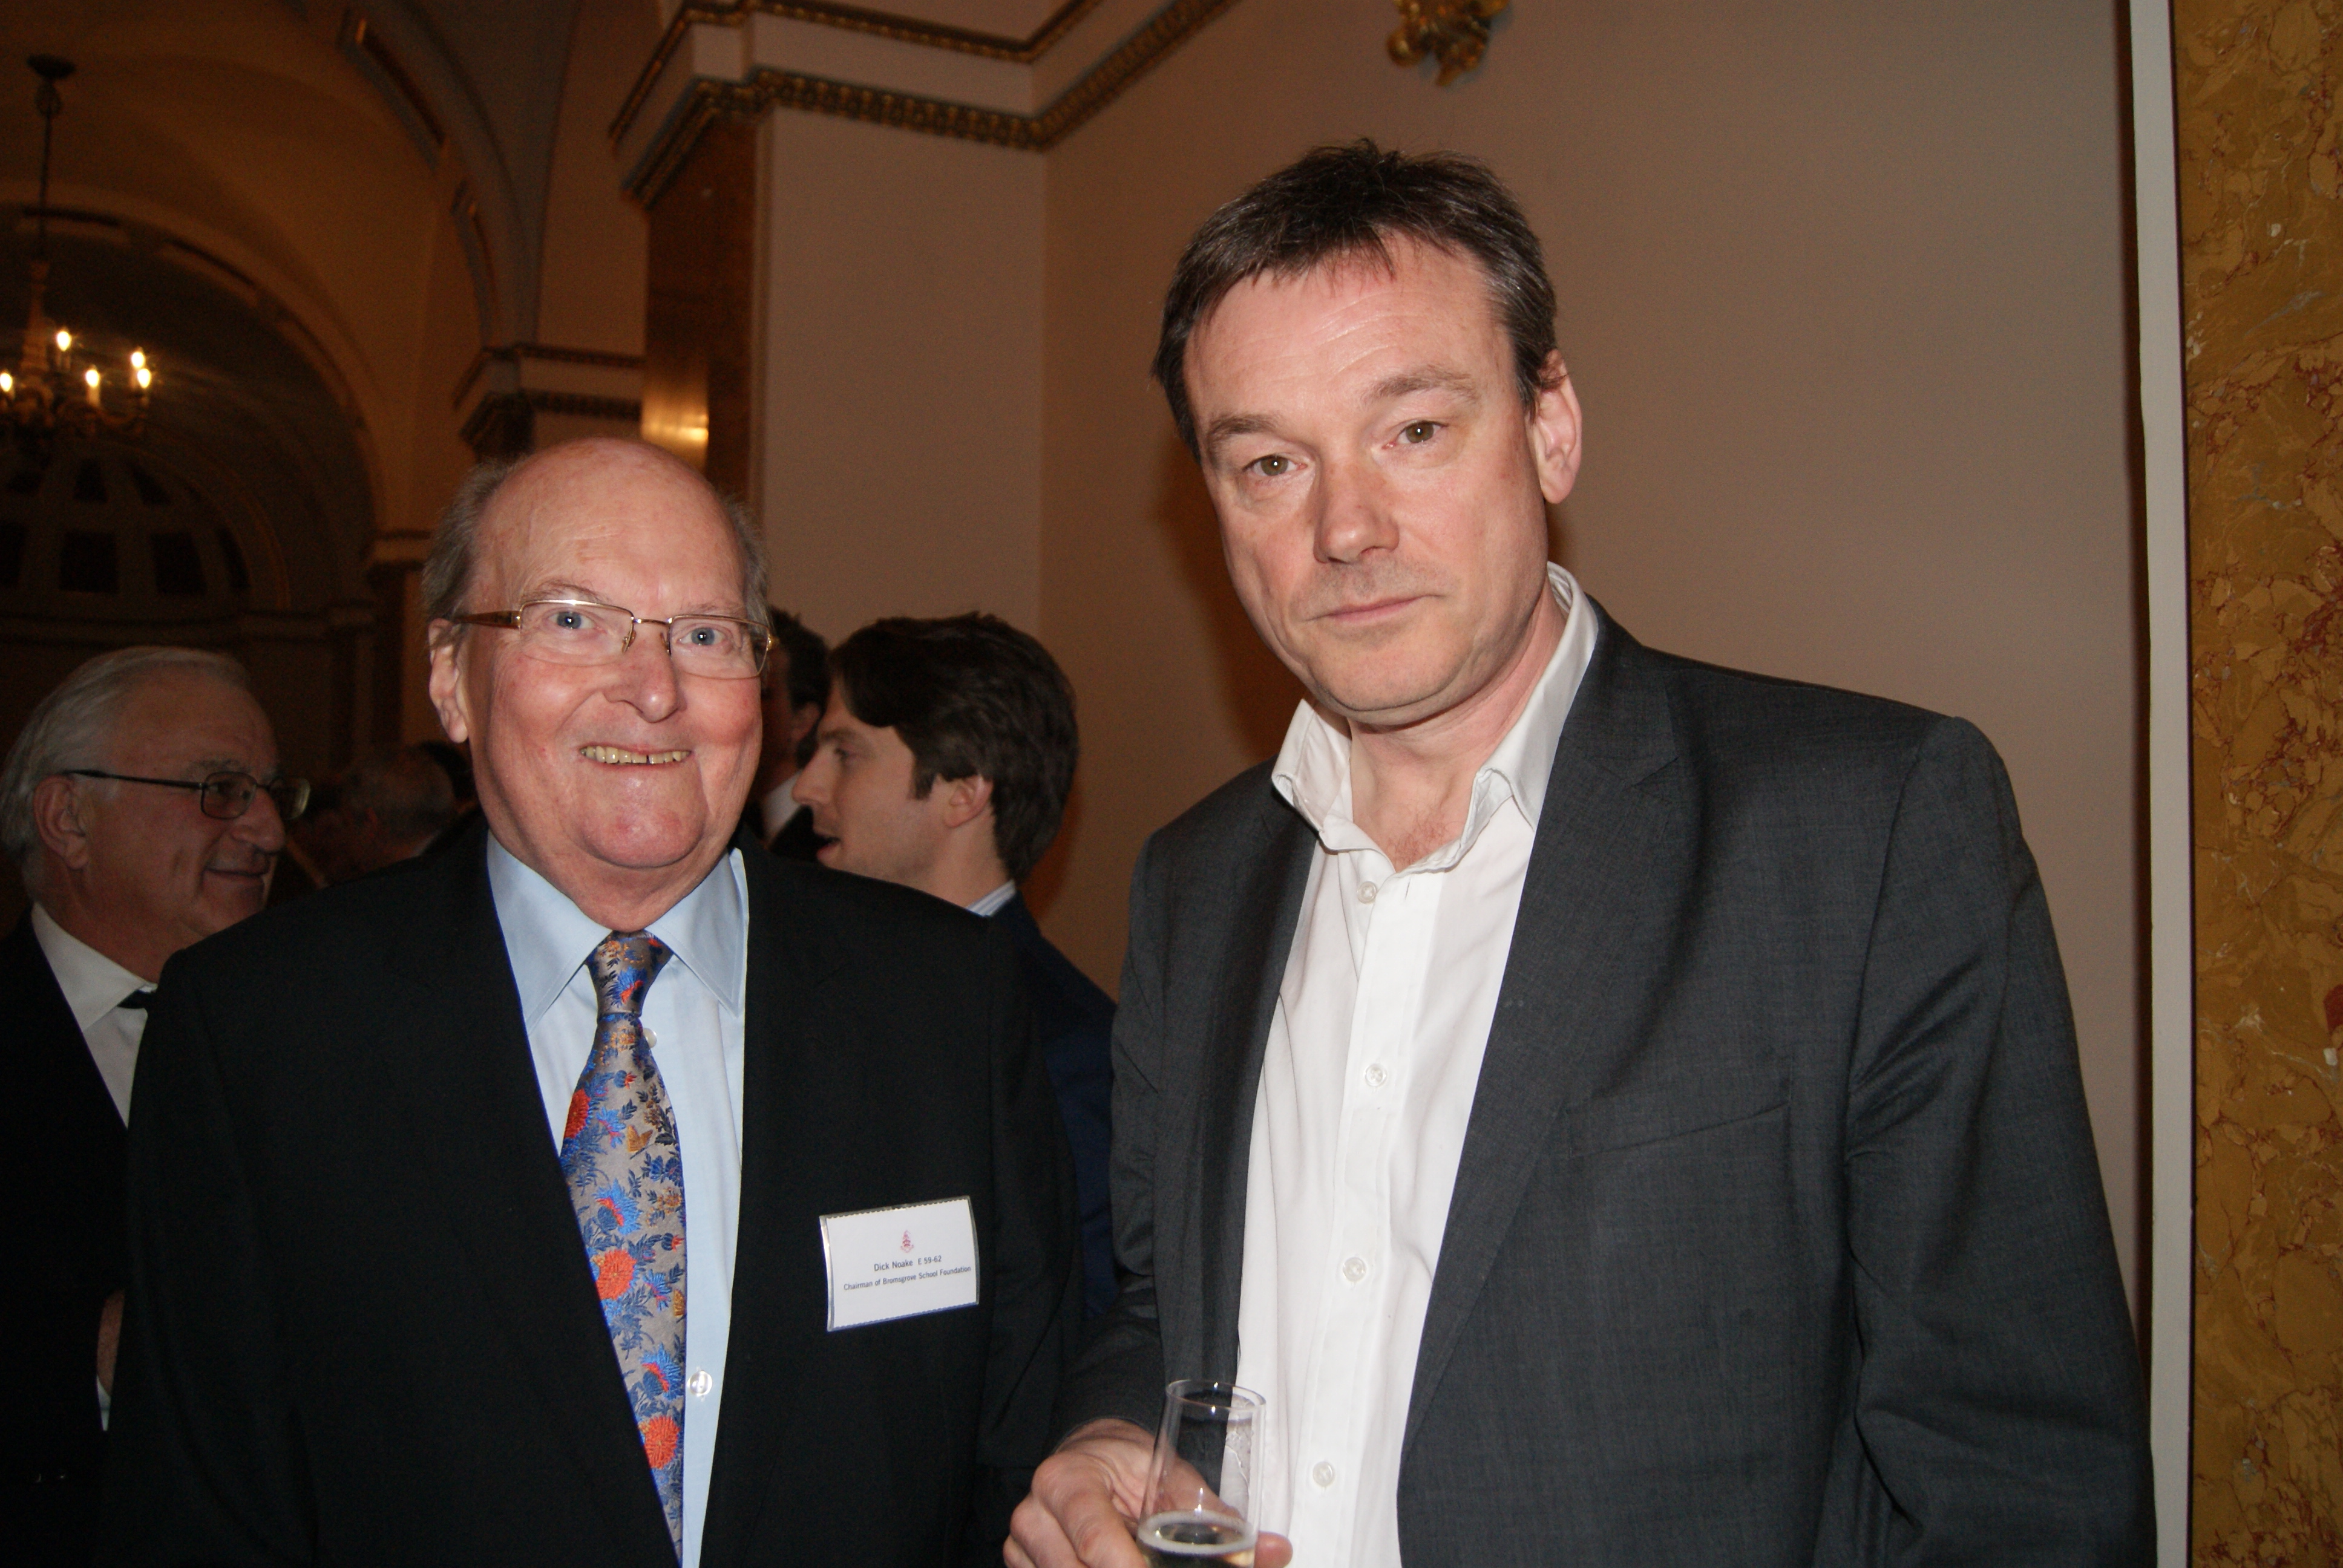 Dick Noake (Chairman of the Foundation) and Stephen Page (Guest Speaker)